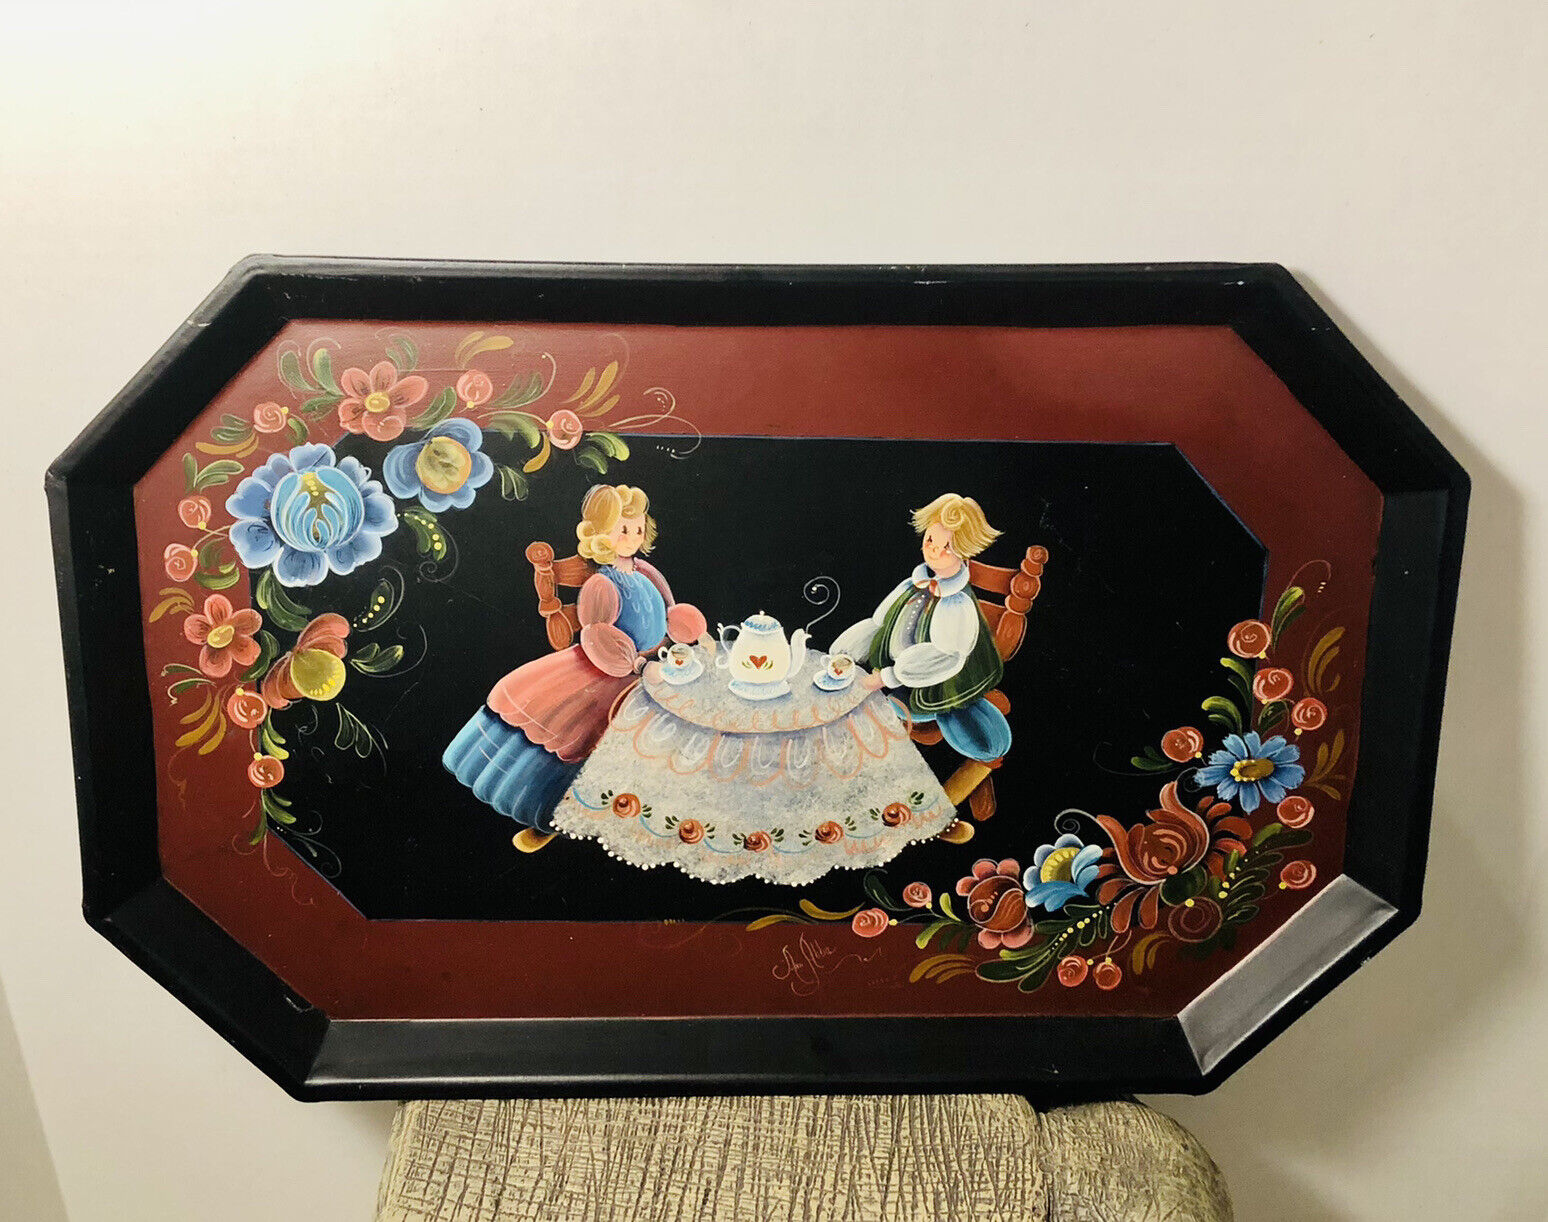 Restored antique￼ Hand Painted  ￼Serving tray 16 x 10 stunning Signed Artwork ￼